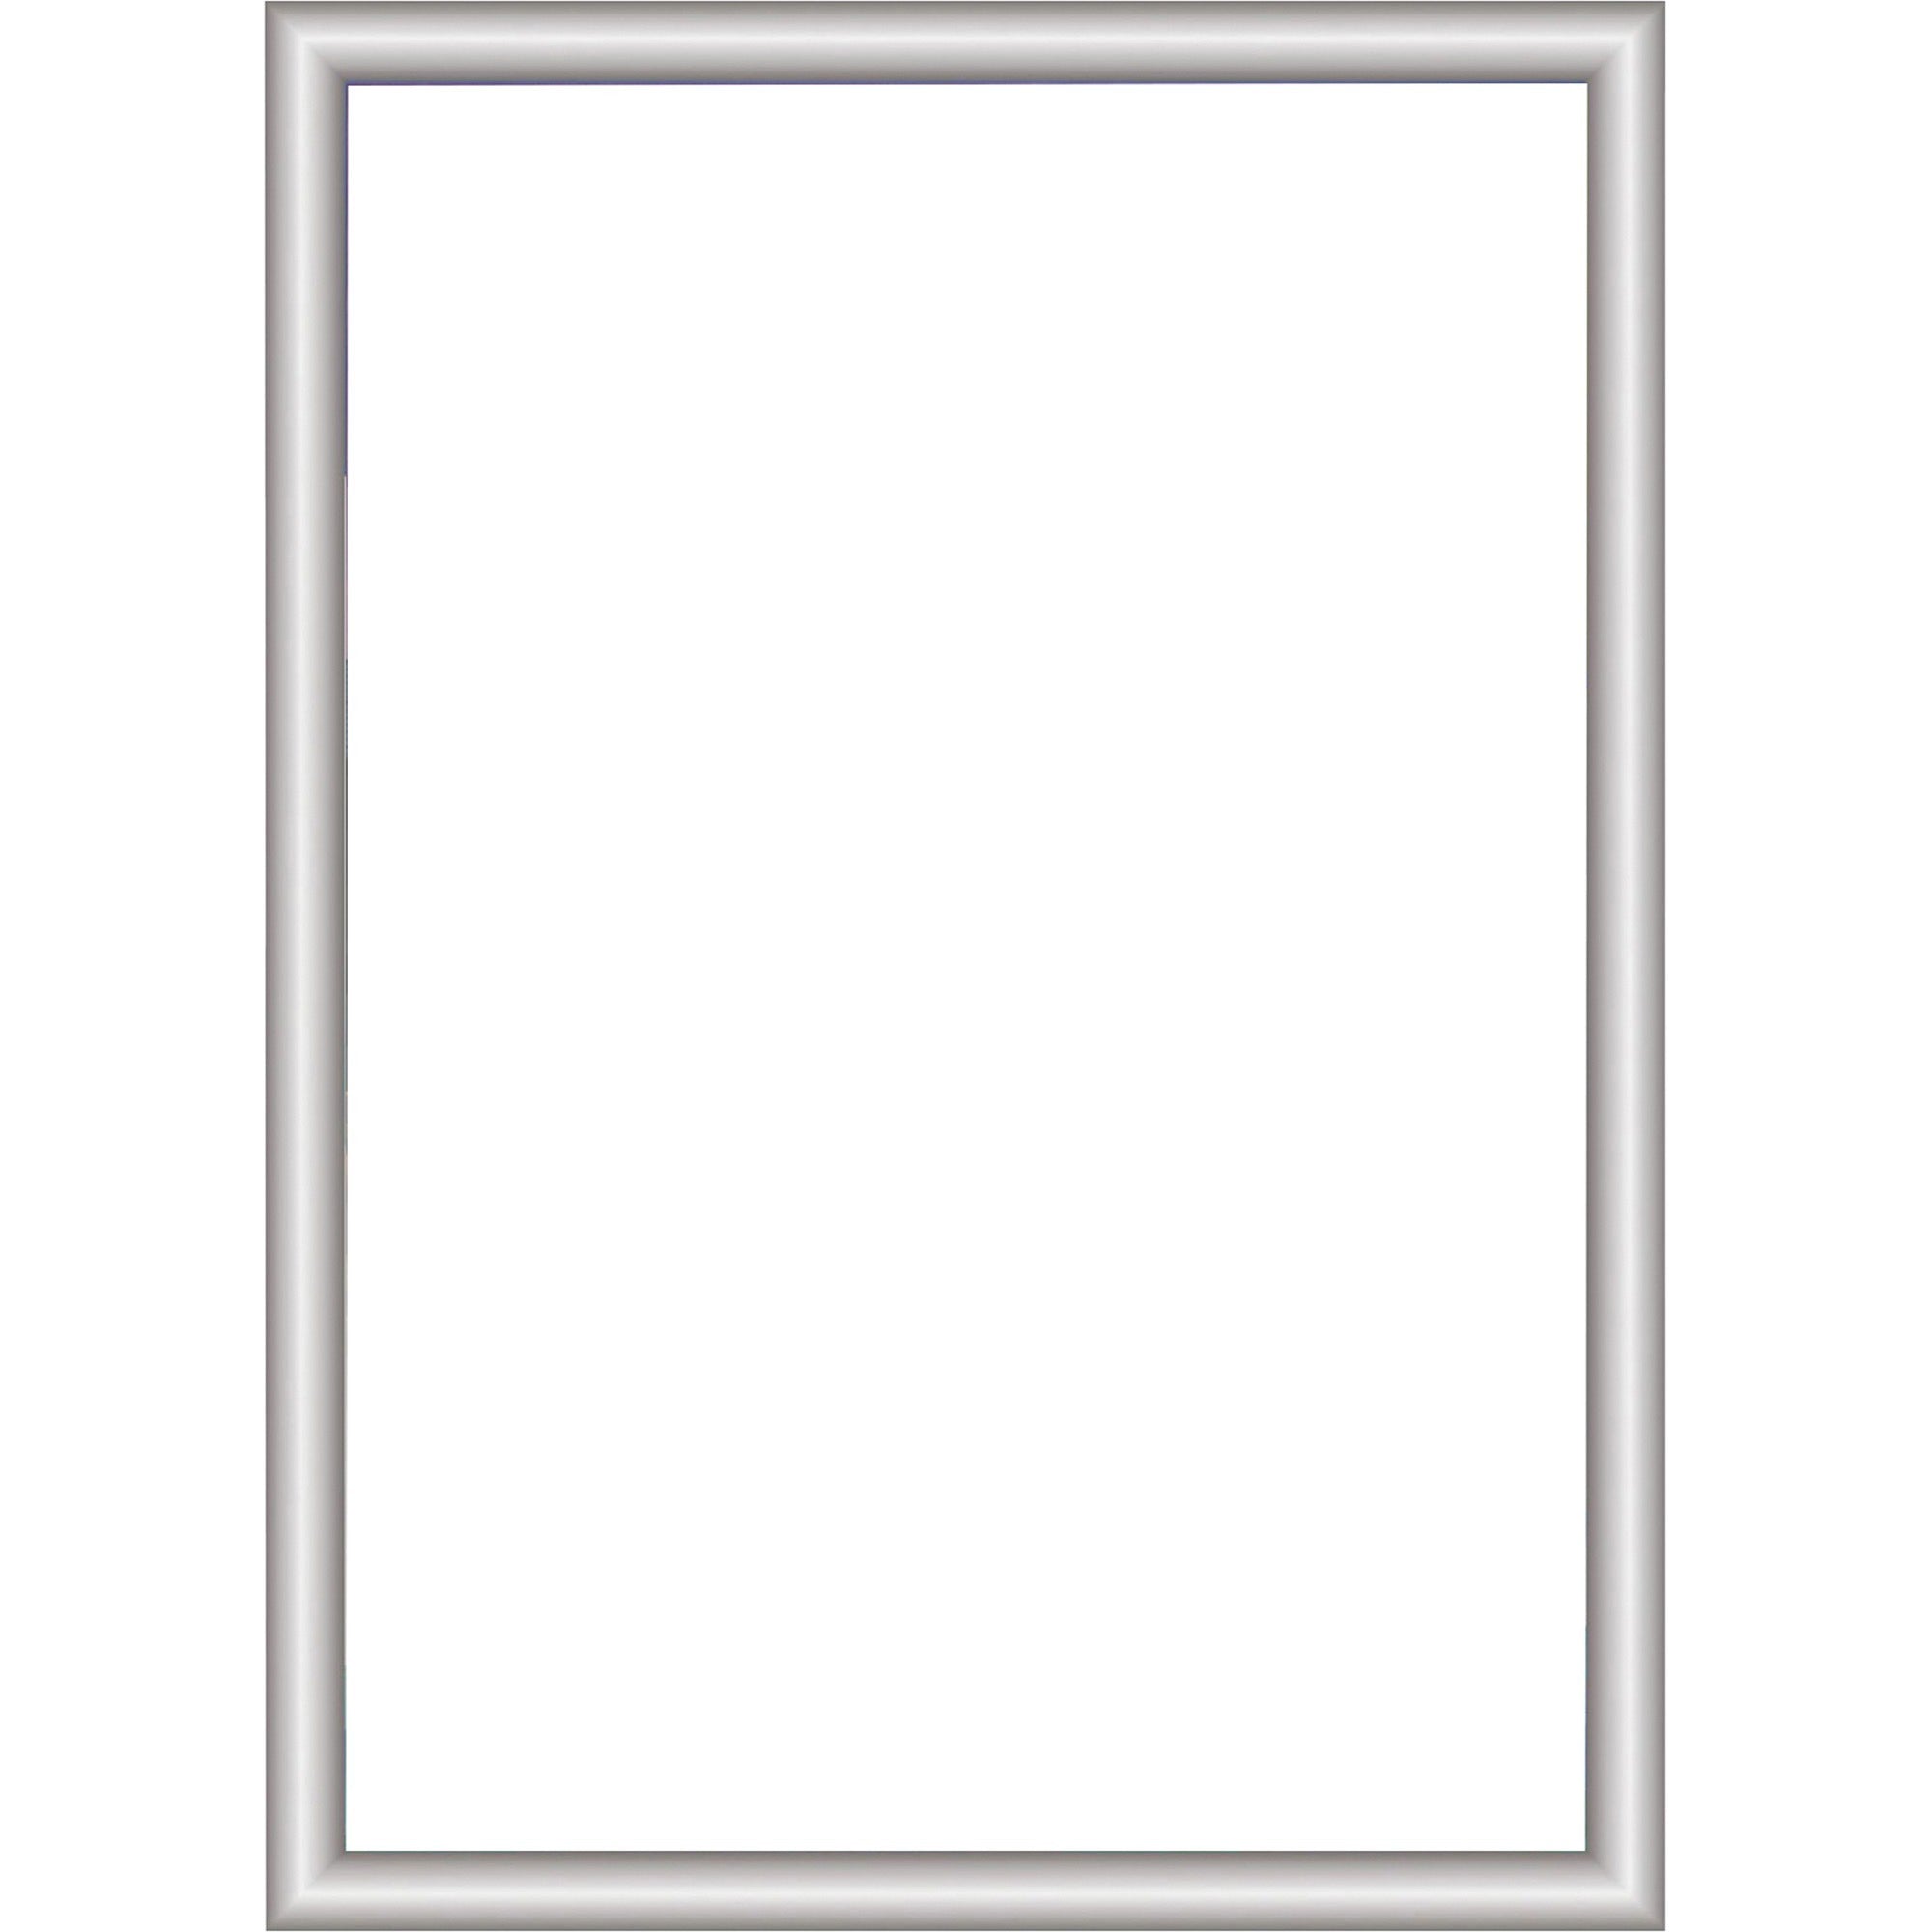 deflecto-wall-mount-display-frame-975-x-1225-frame-size-holds-850-x-11-insert-rectangle-vertical-horizontal-satin-front-loading-anti-glare-dust-resistant-debris-resistant-1-each-aluminum-clear-silver_def690001 - 2